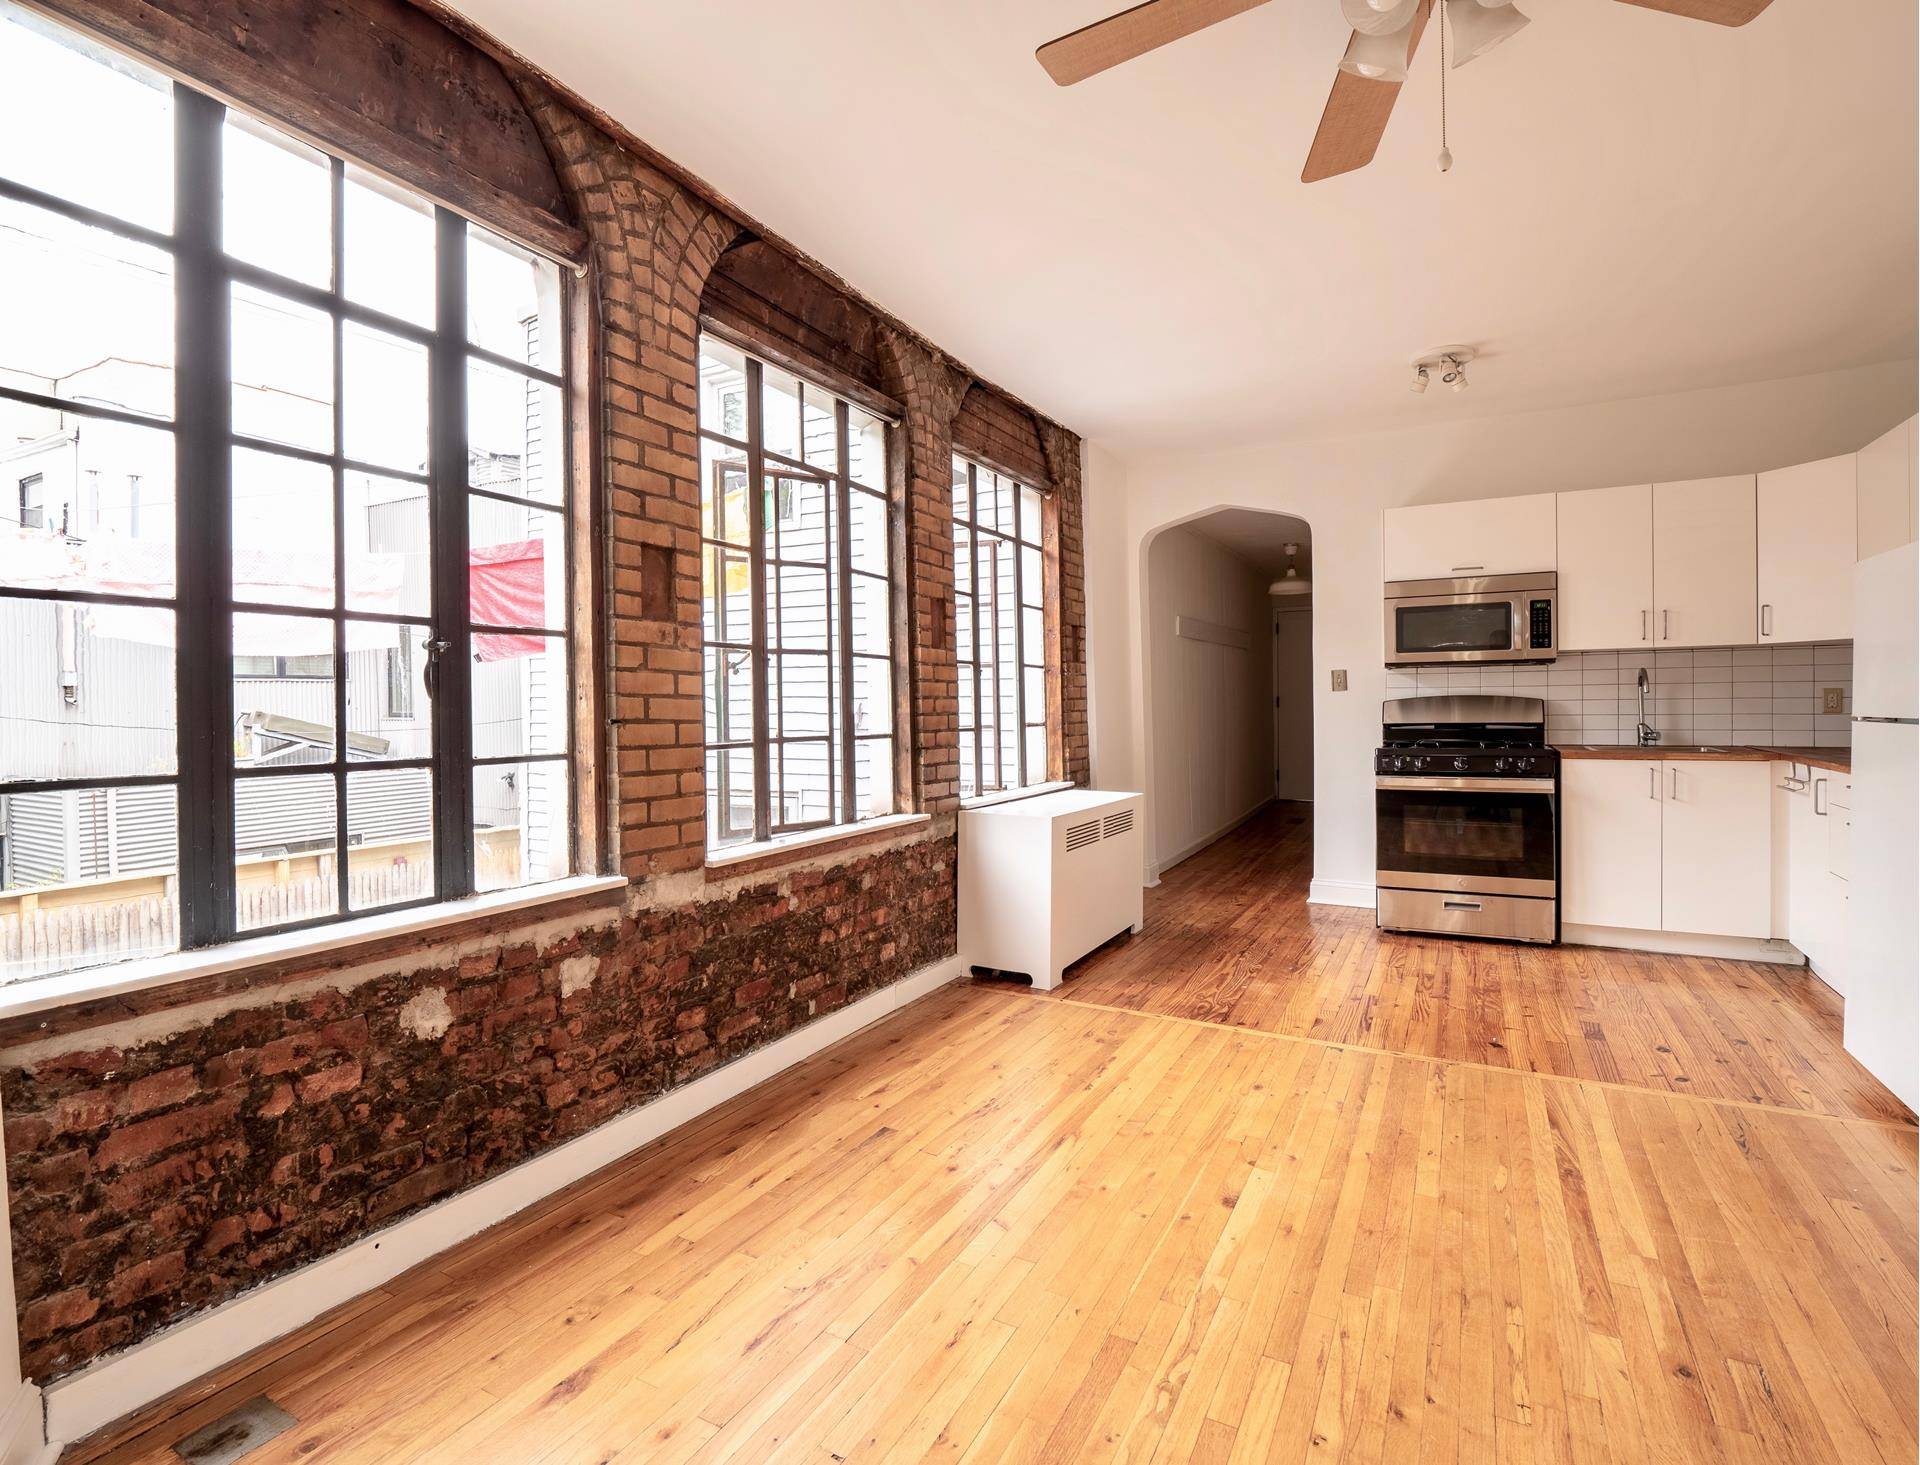 Two bedroom home with excellent light and exposed brick.